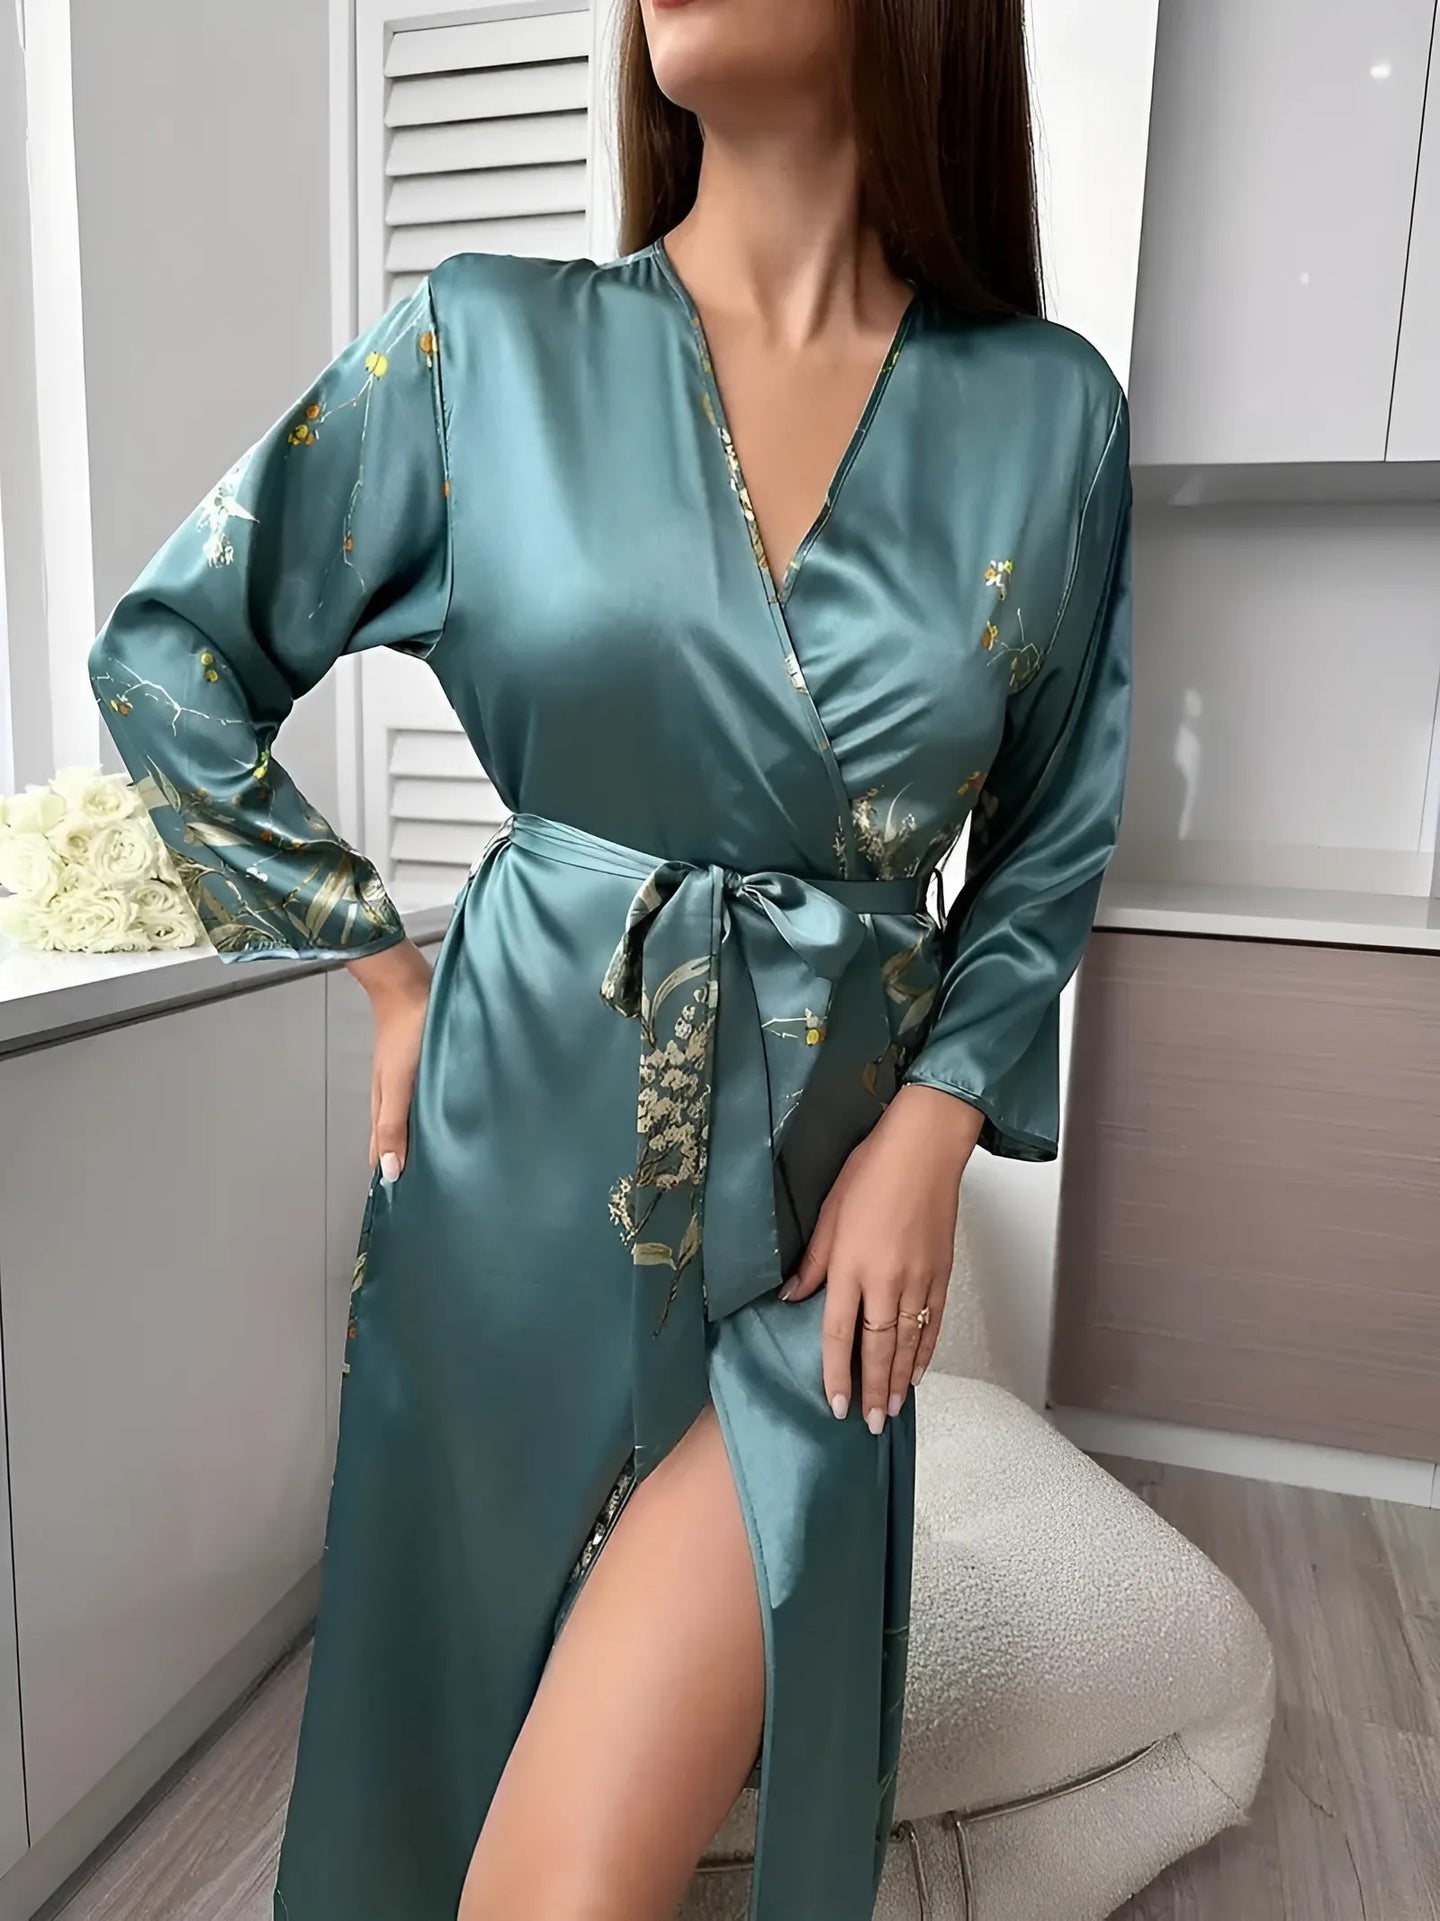 Dressing Gown Elegant Satin Floral Print Long Sleeve V Neck Belted Pajamas Satin Nightgown Nightgown Sleepwear Belt Sexy Sleepwear for Women Lingerie for Women 